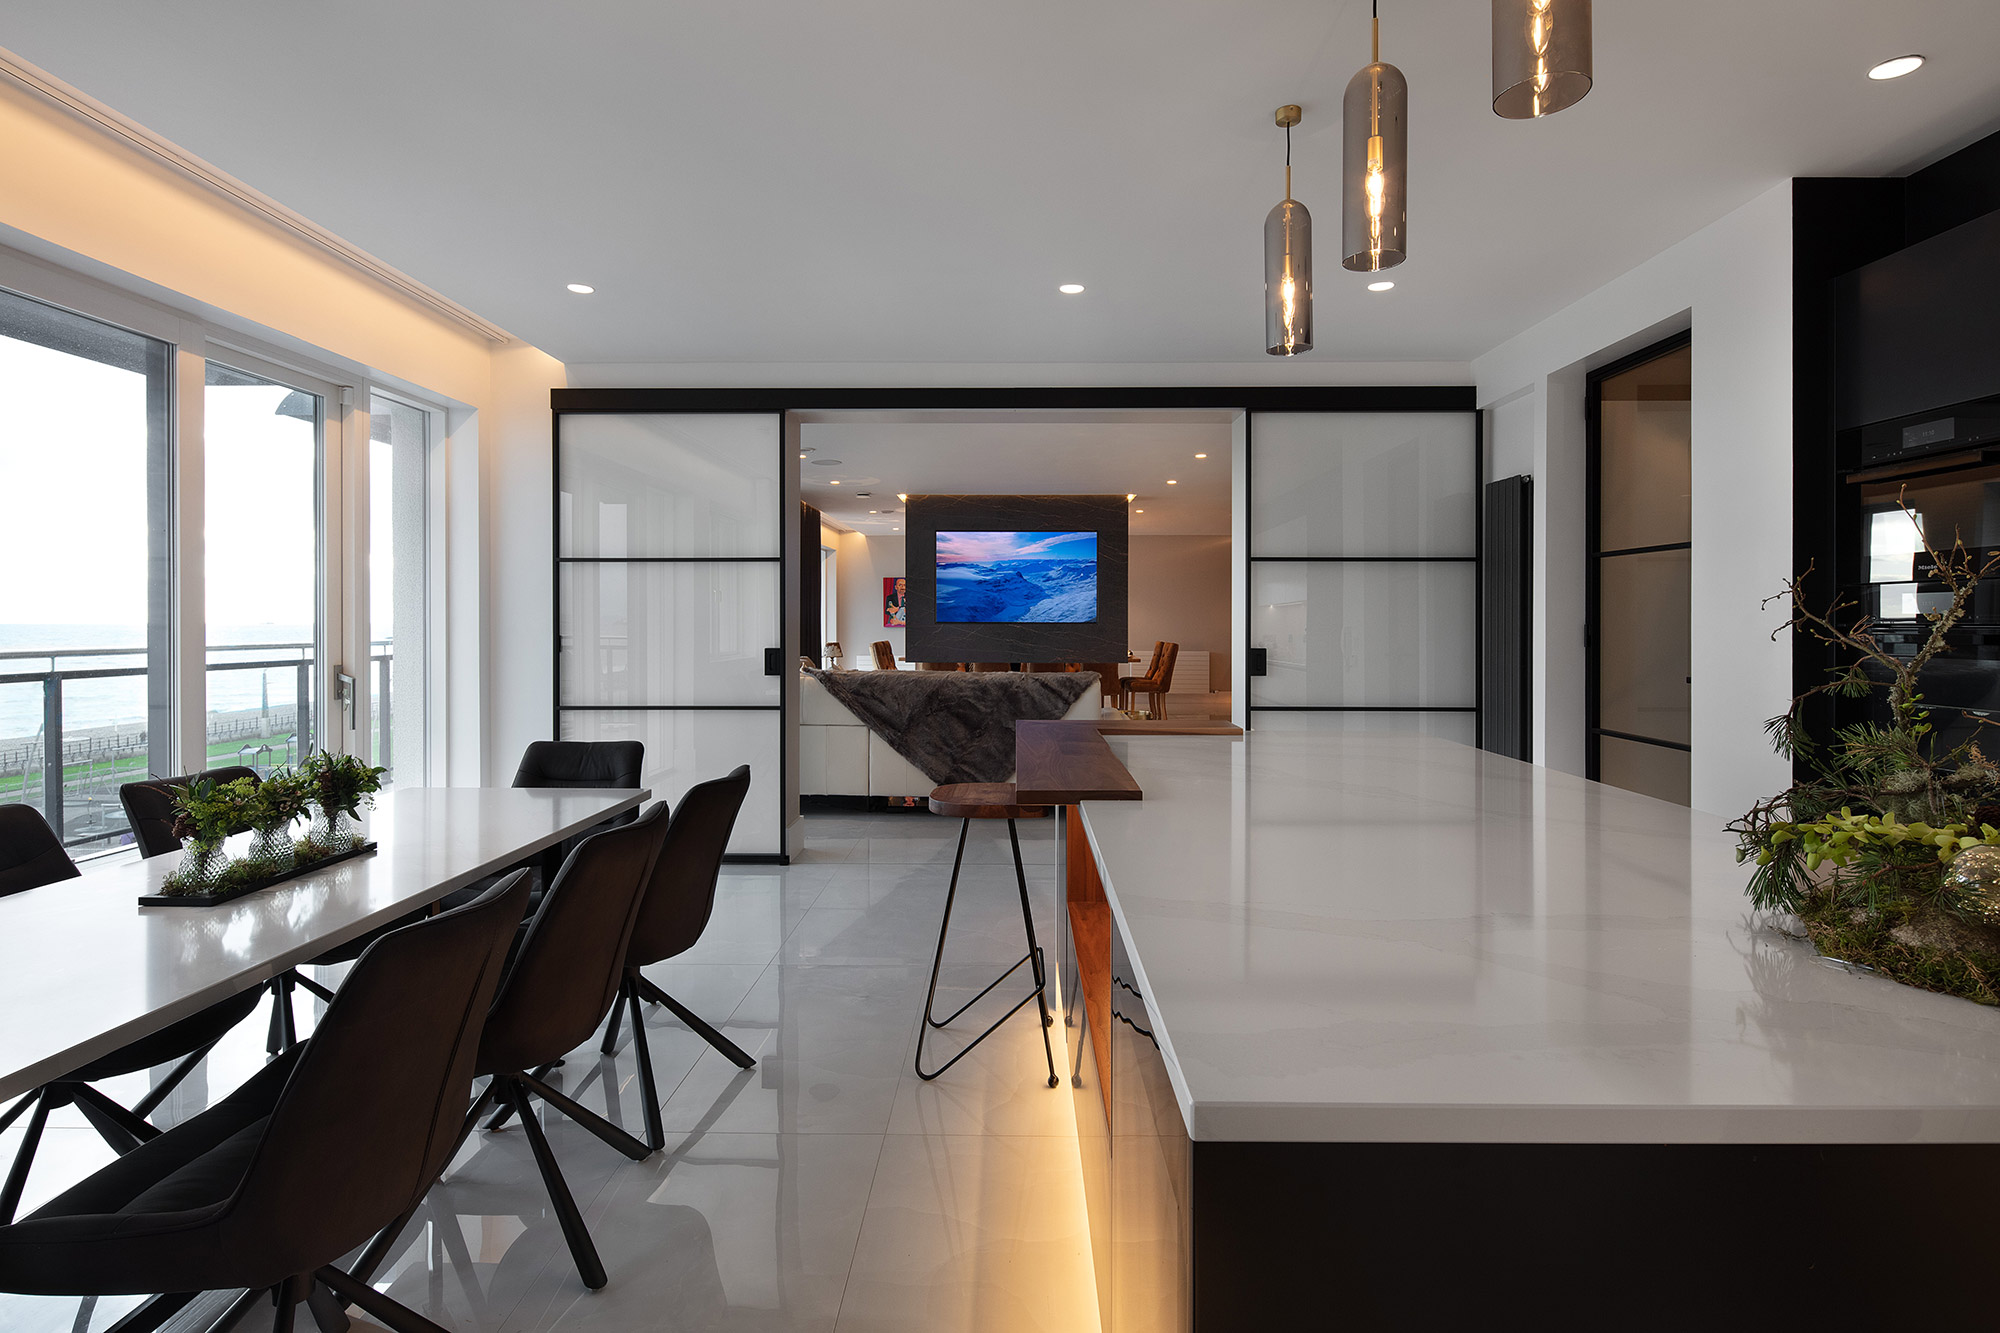 Image of Cosentino Bray Penthouse 8 in Dekton Rem brings warmth and sophistication to a renovated home without the need for building work - Cosentino